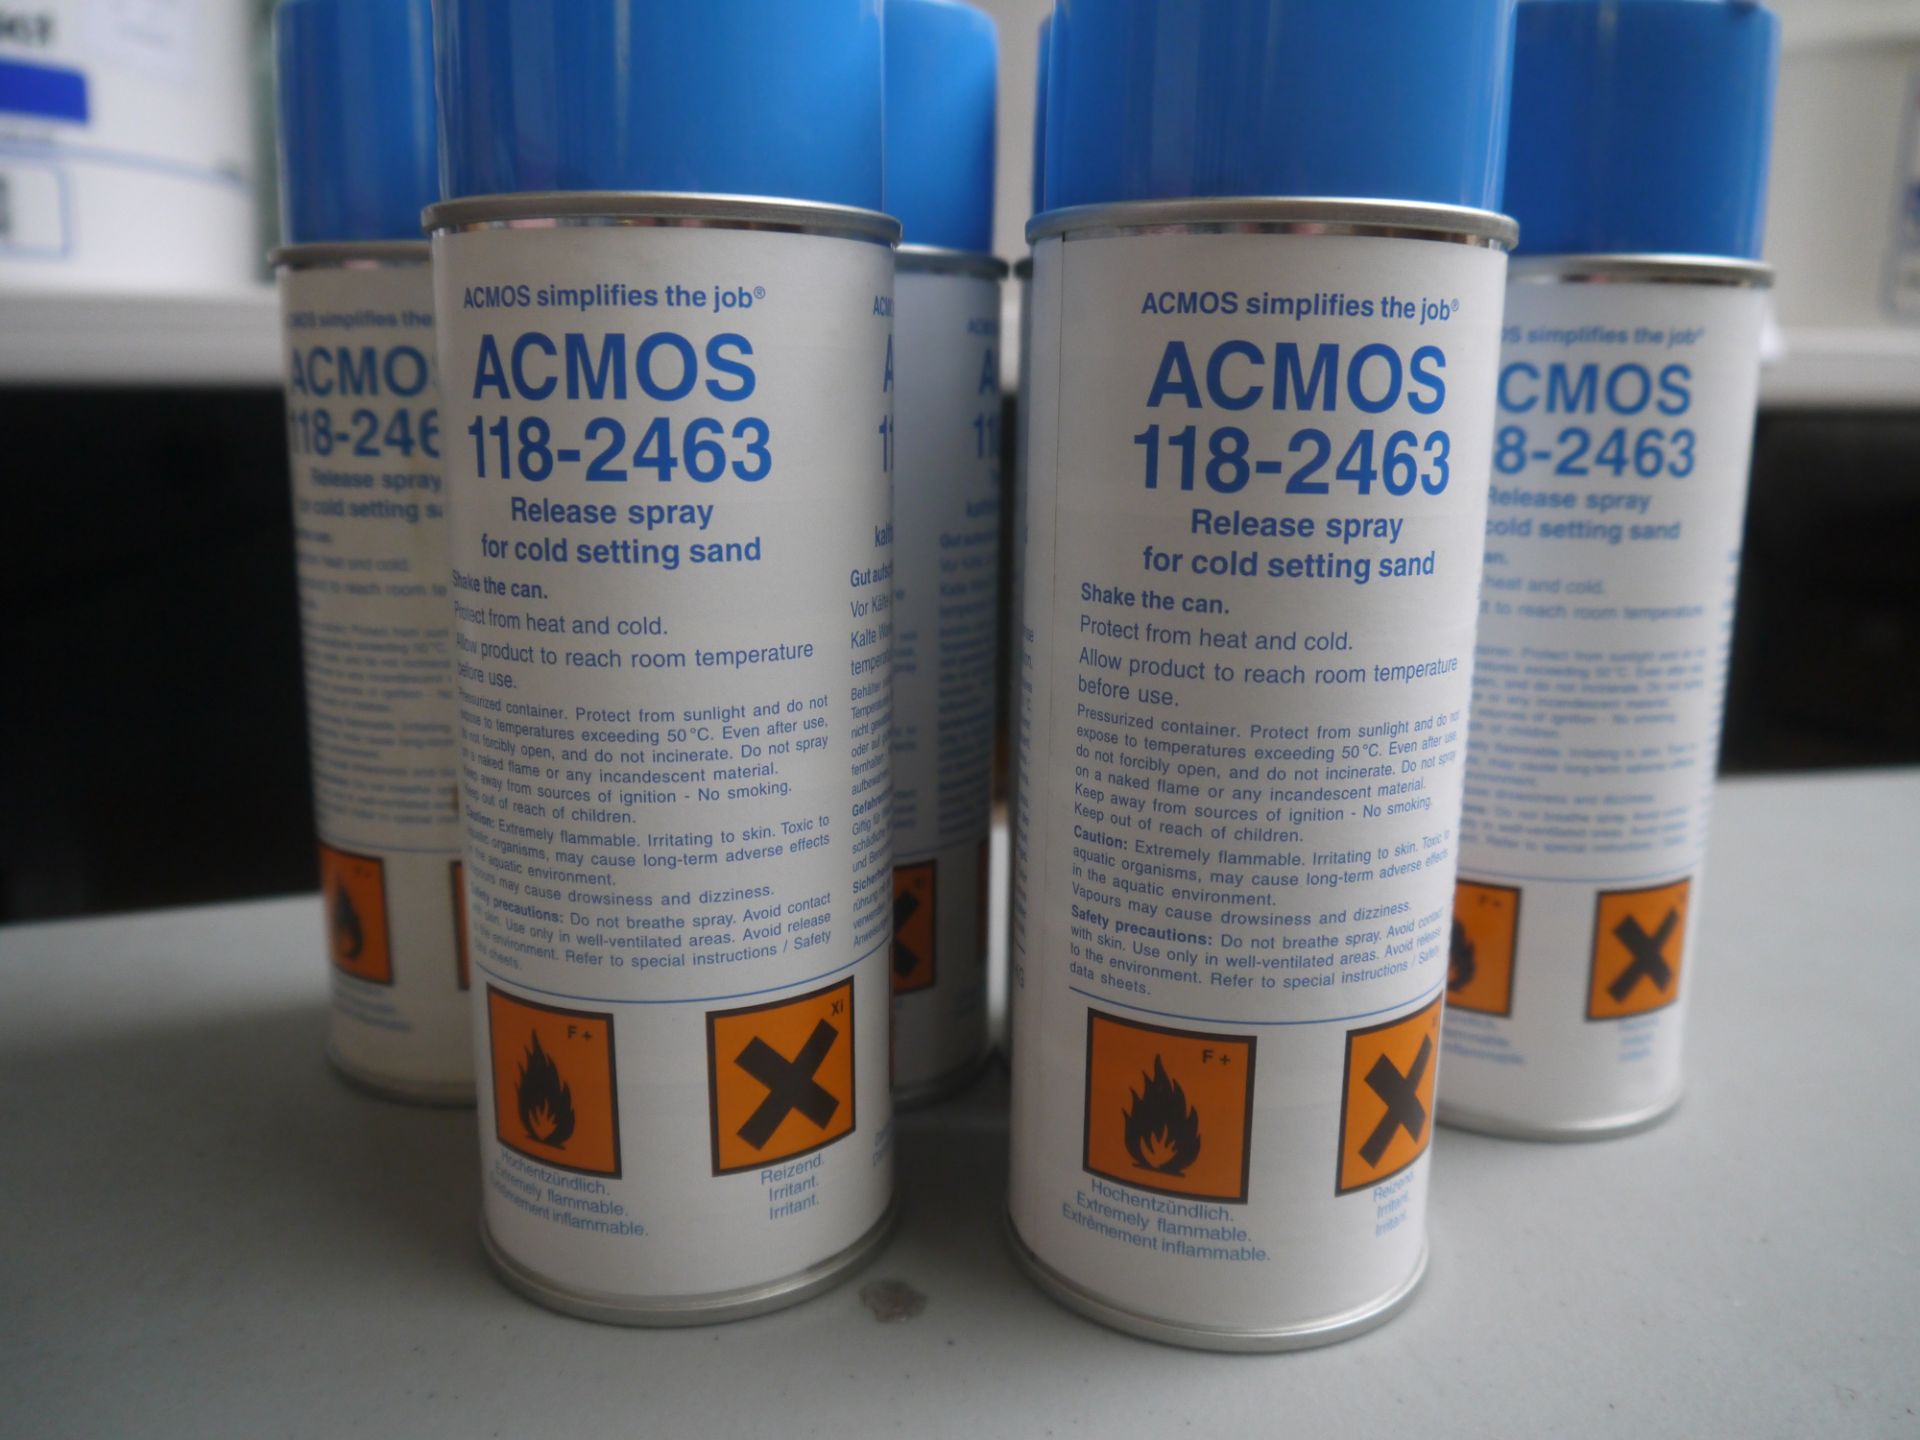 6x 400 ml of ACMOS 118-2463 Release Spray for Cold Setting Sand. It is a special parting agent for